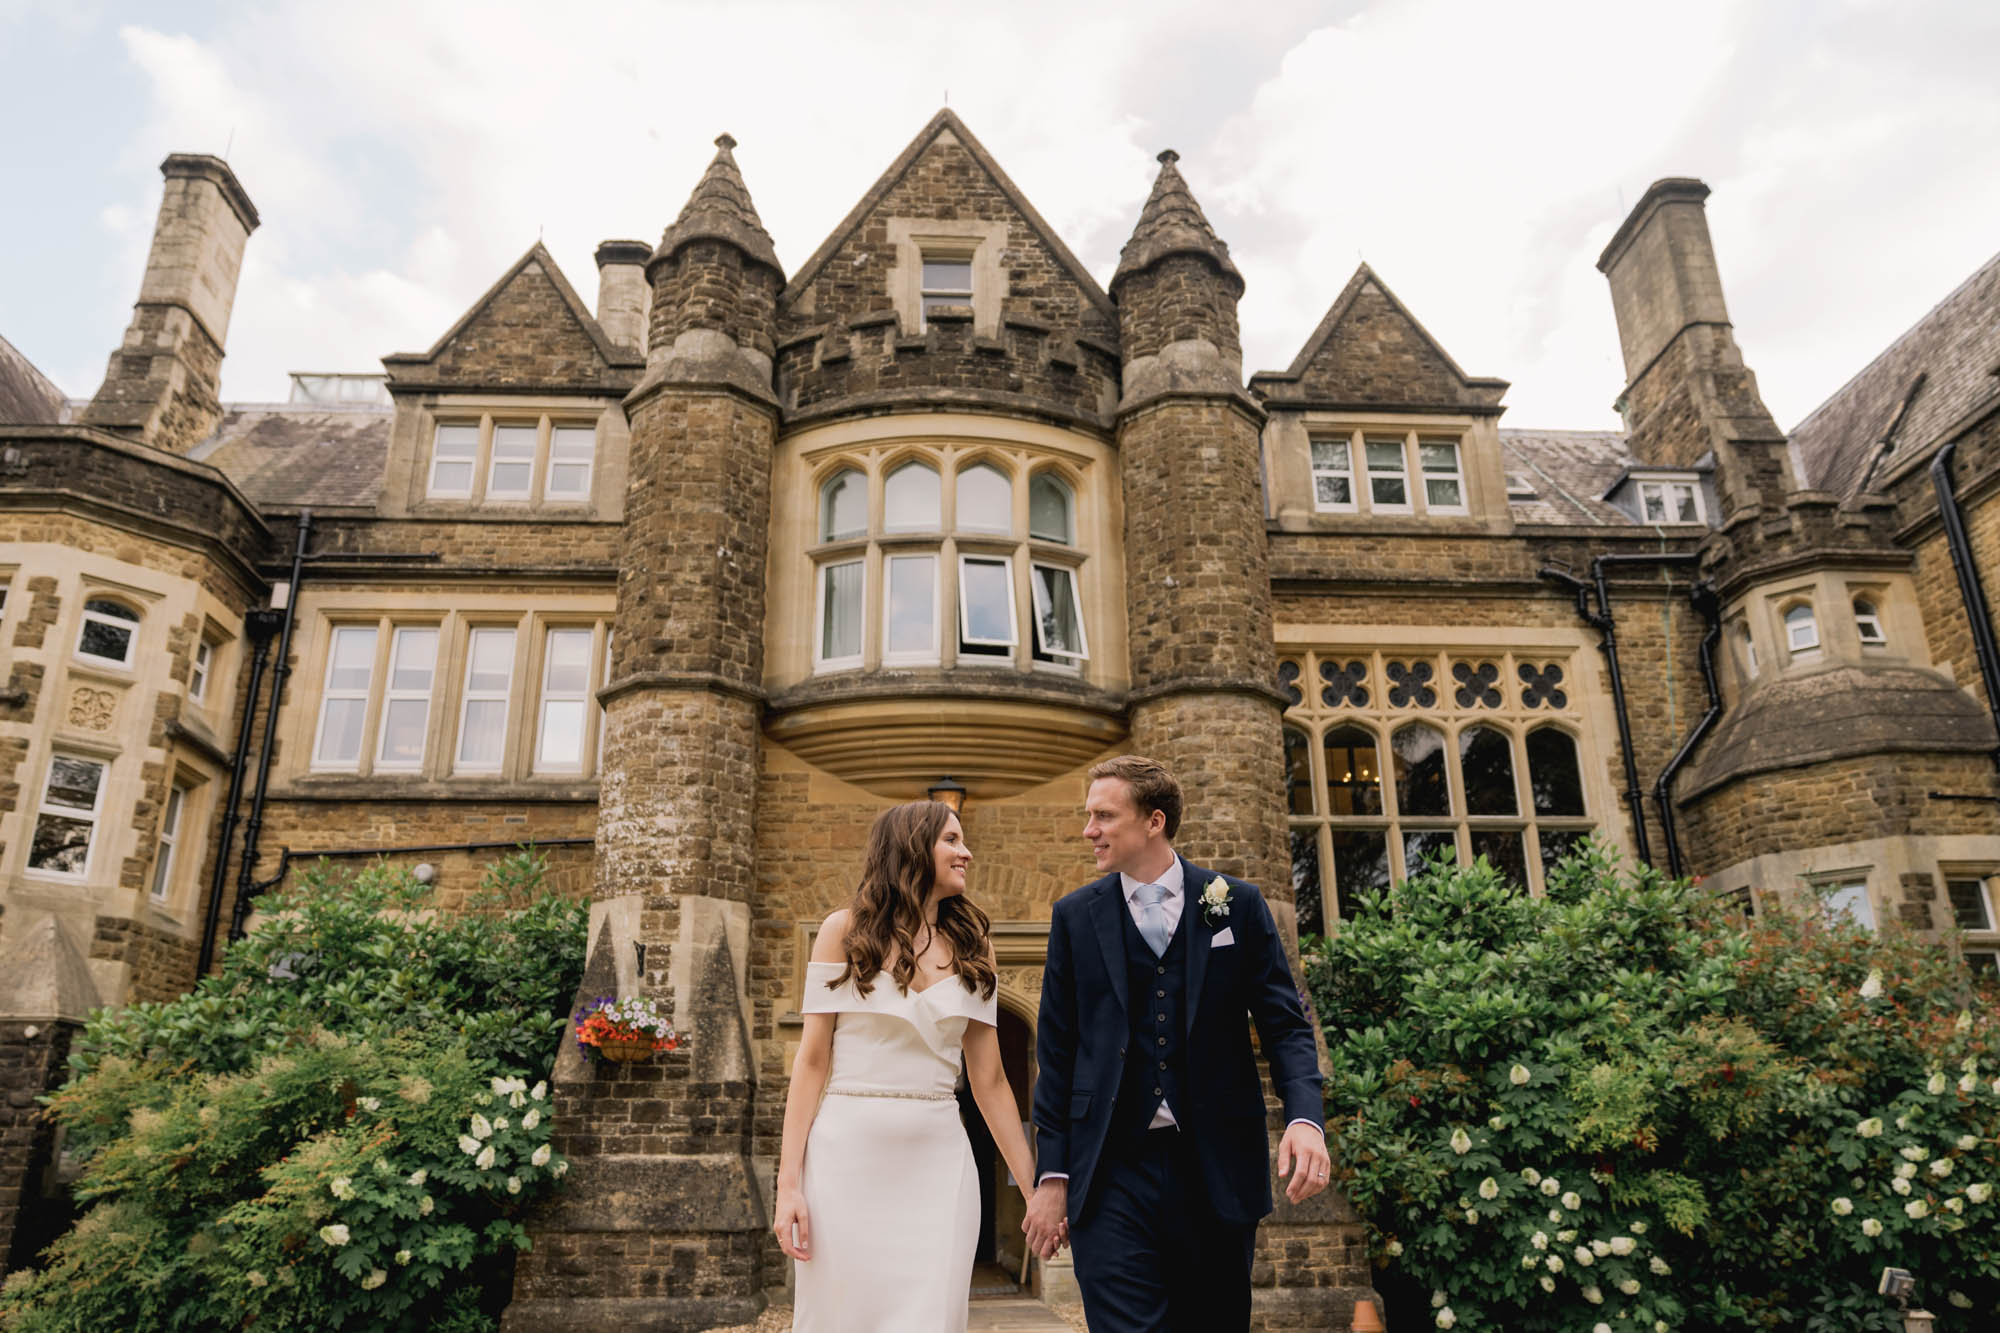 Bride and groom smiling whilst they take a stroll on their wedding day with Hartsfield manor in the background.